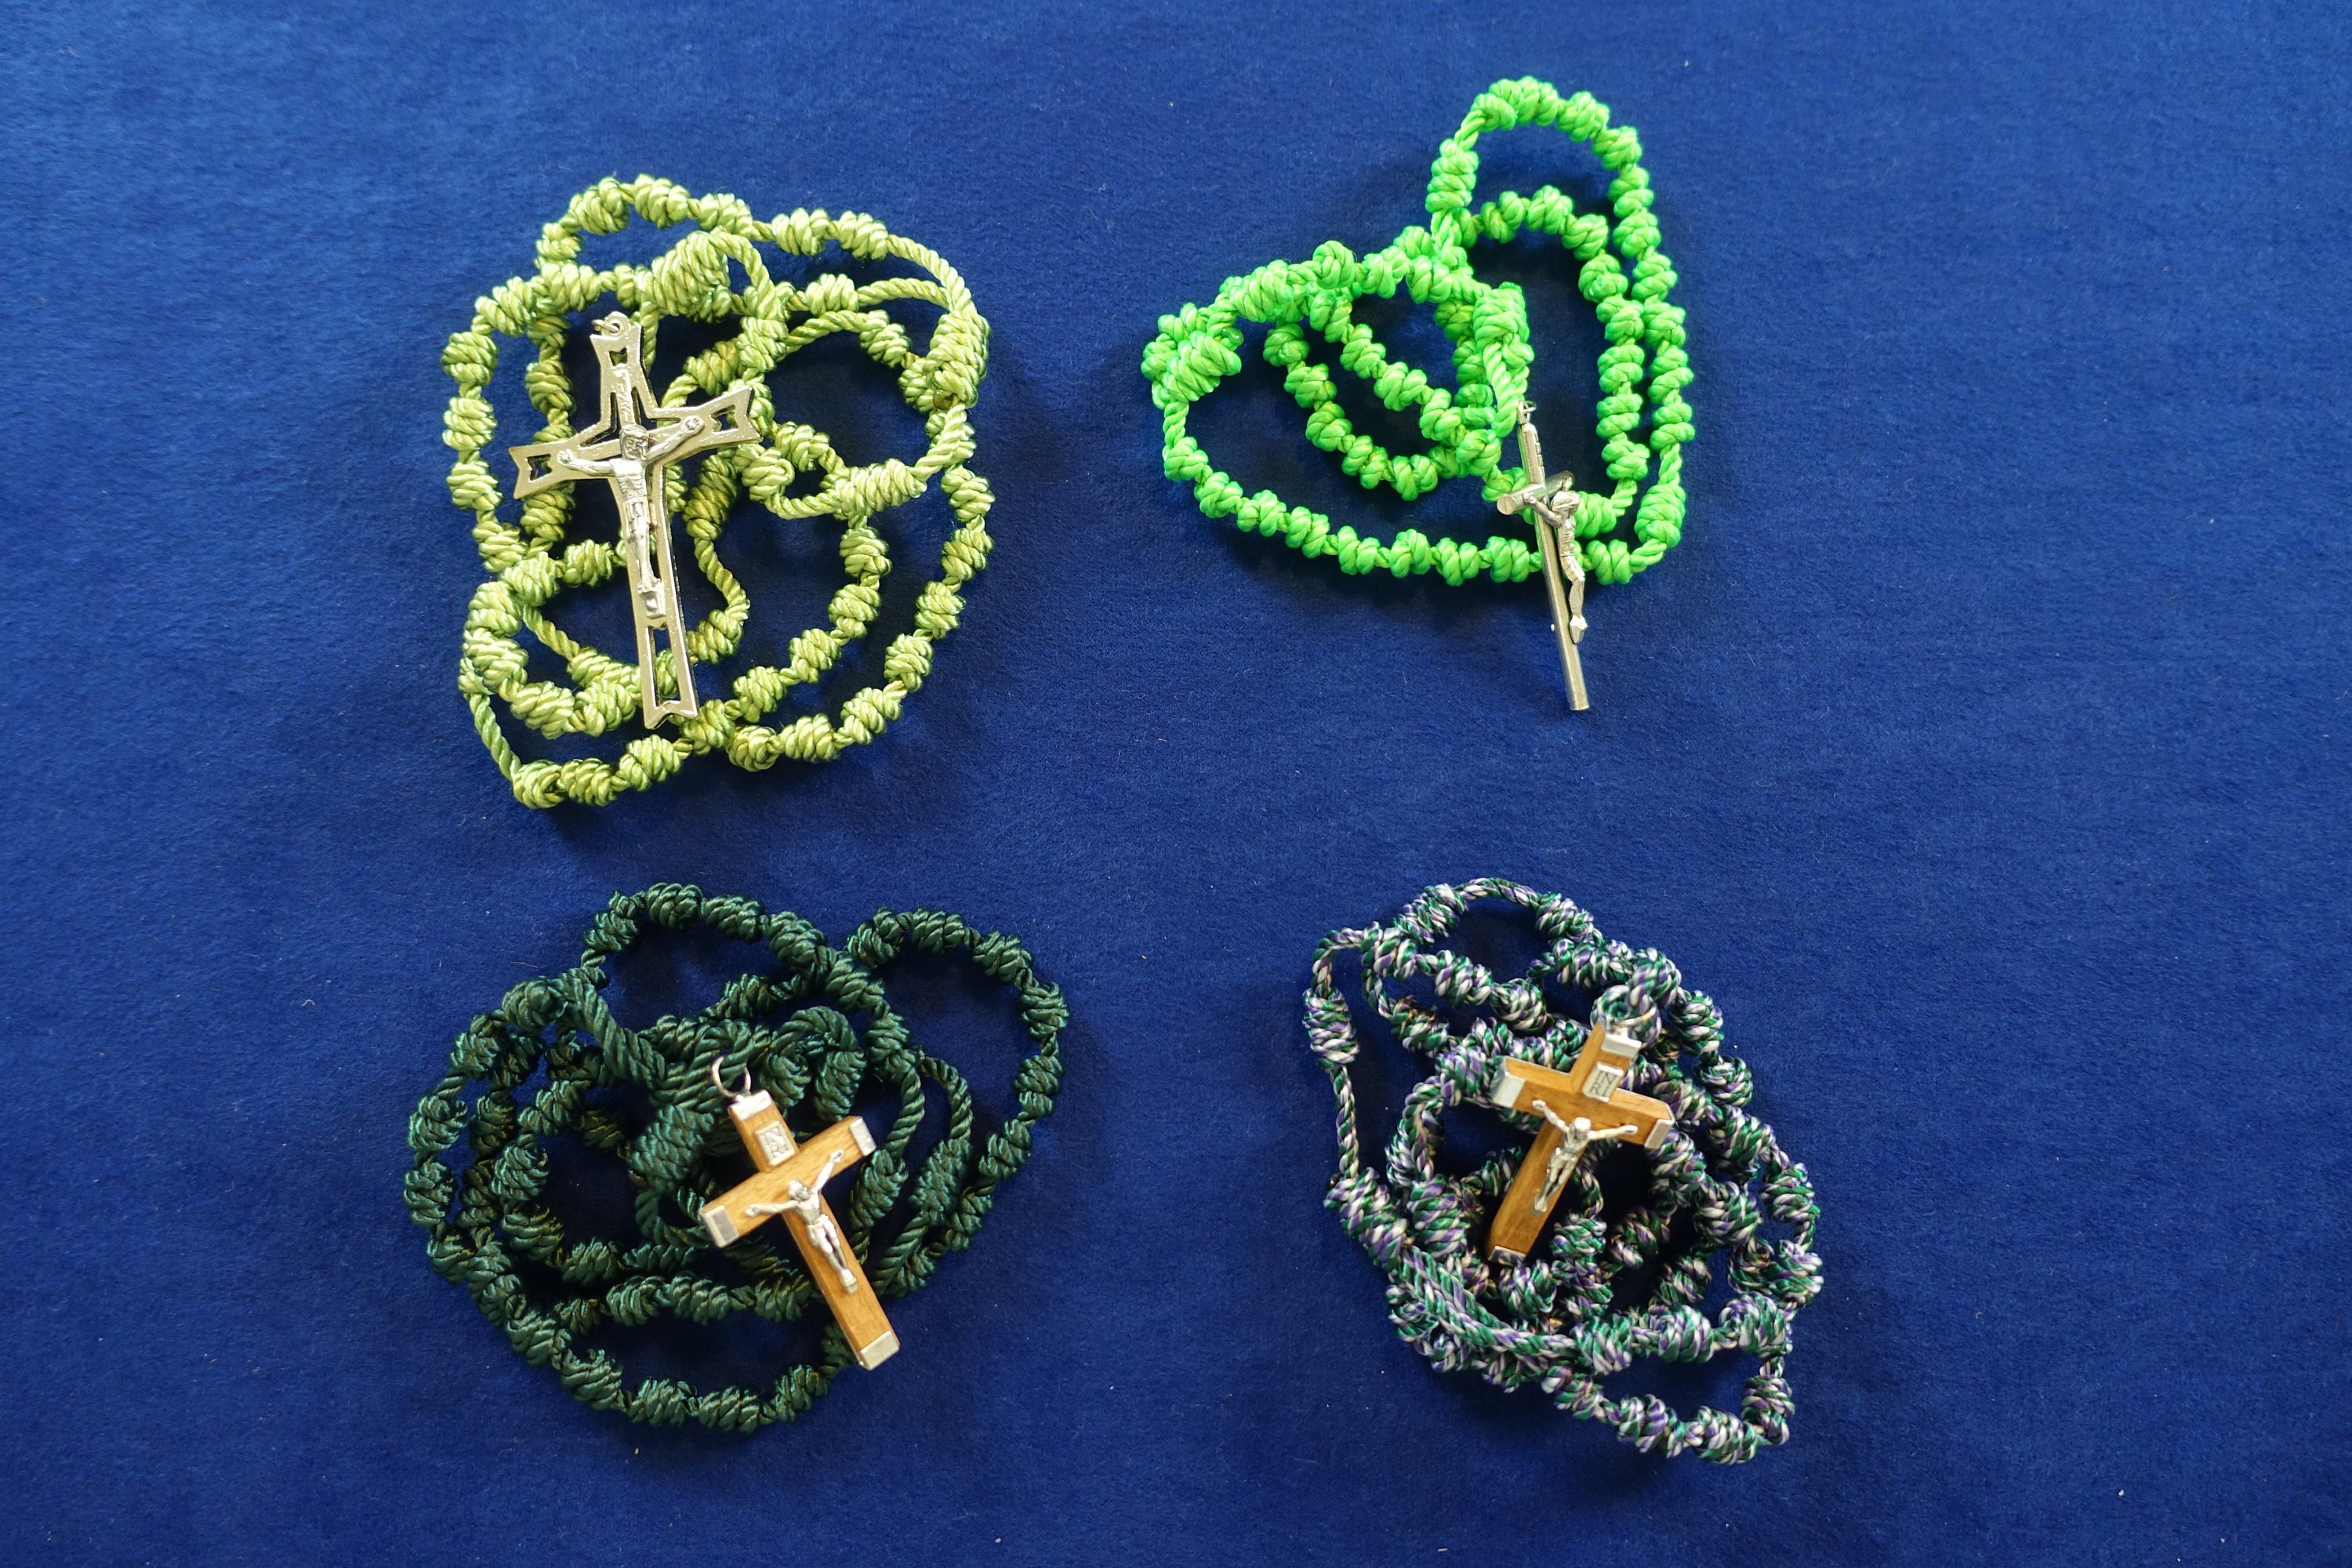 Buy Greens & Browns Knotted Cord Rosary Different Colour Options